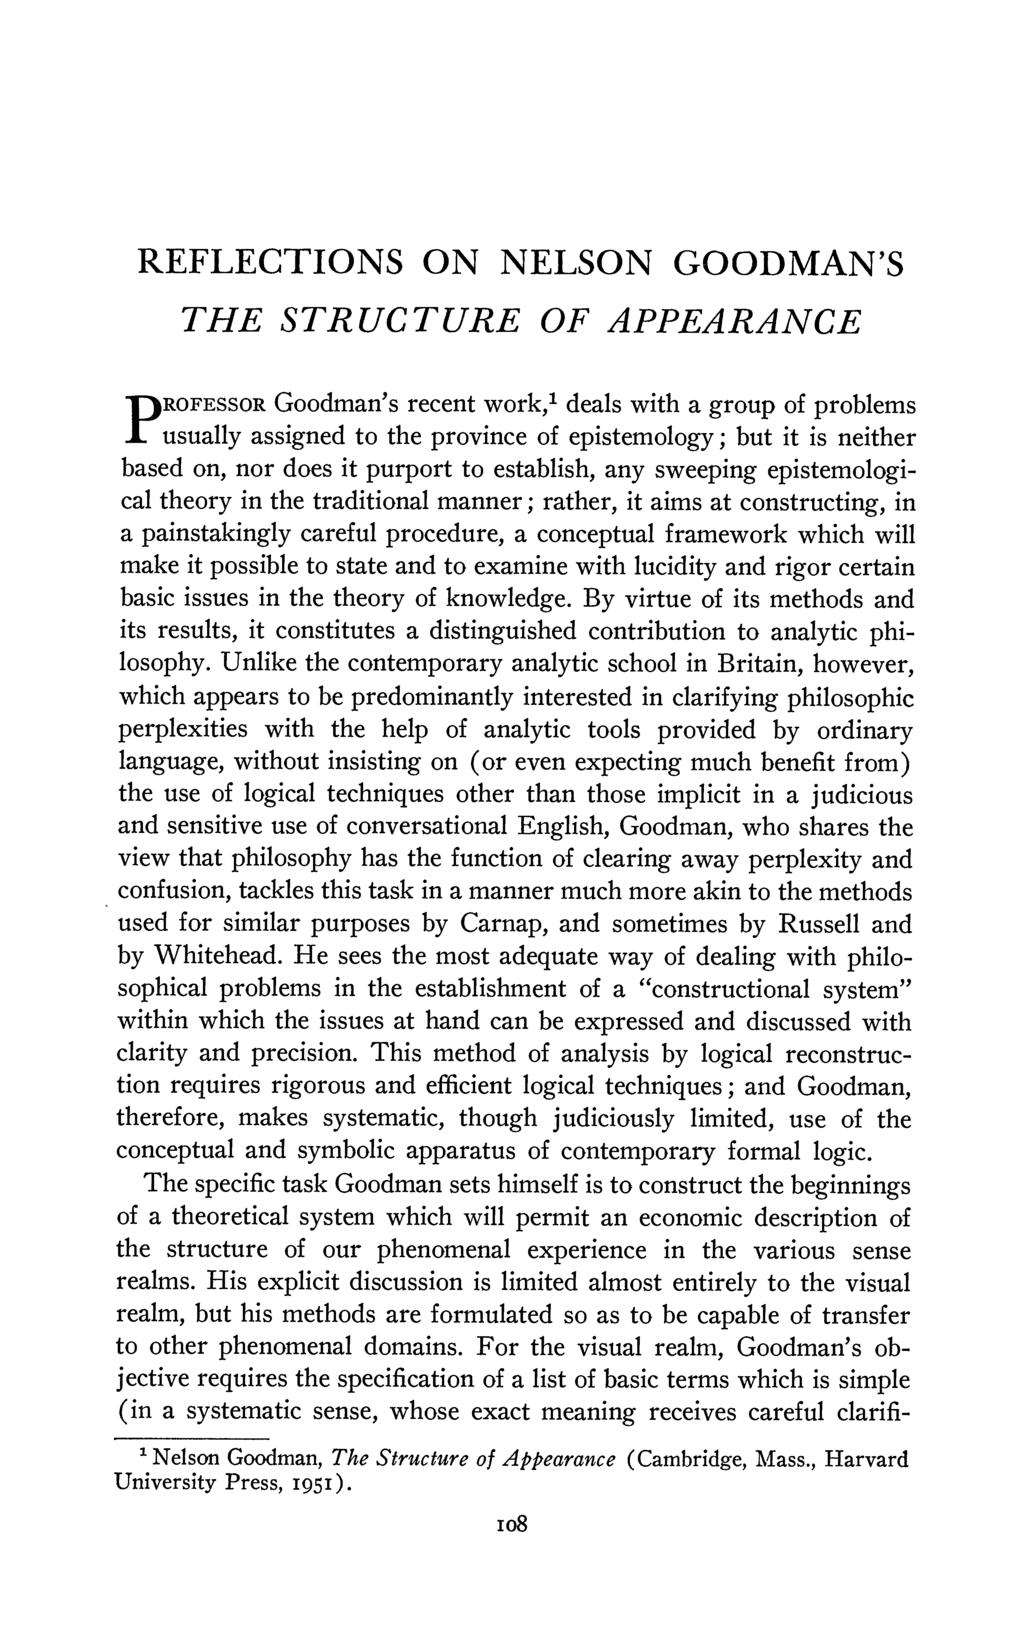 REFLECTIONS ON NELSON GOODMAN'S THE STRUCTURE OF APPEARANCE PROFESSOR Goodman's recent work,' deals with a group of problems usually assigned to the province of epistemology; but it is neither based